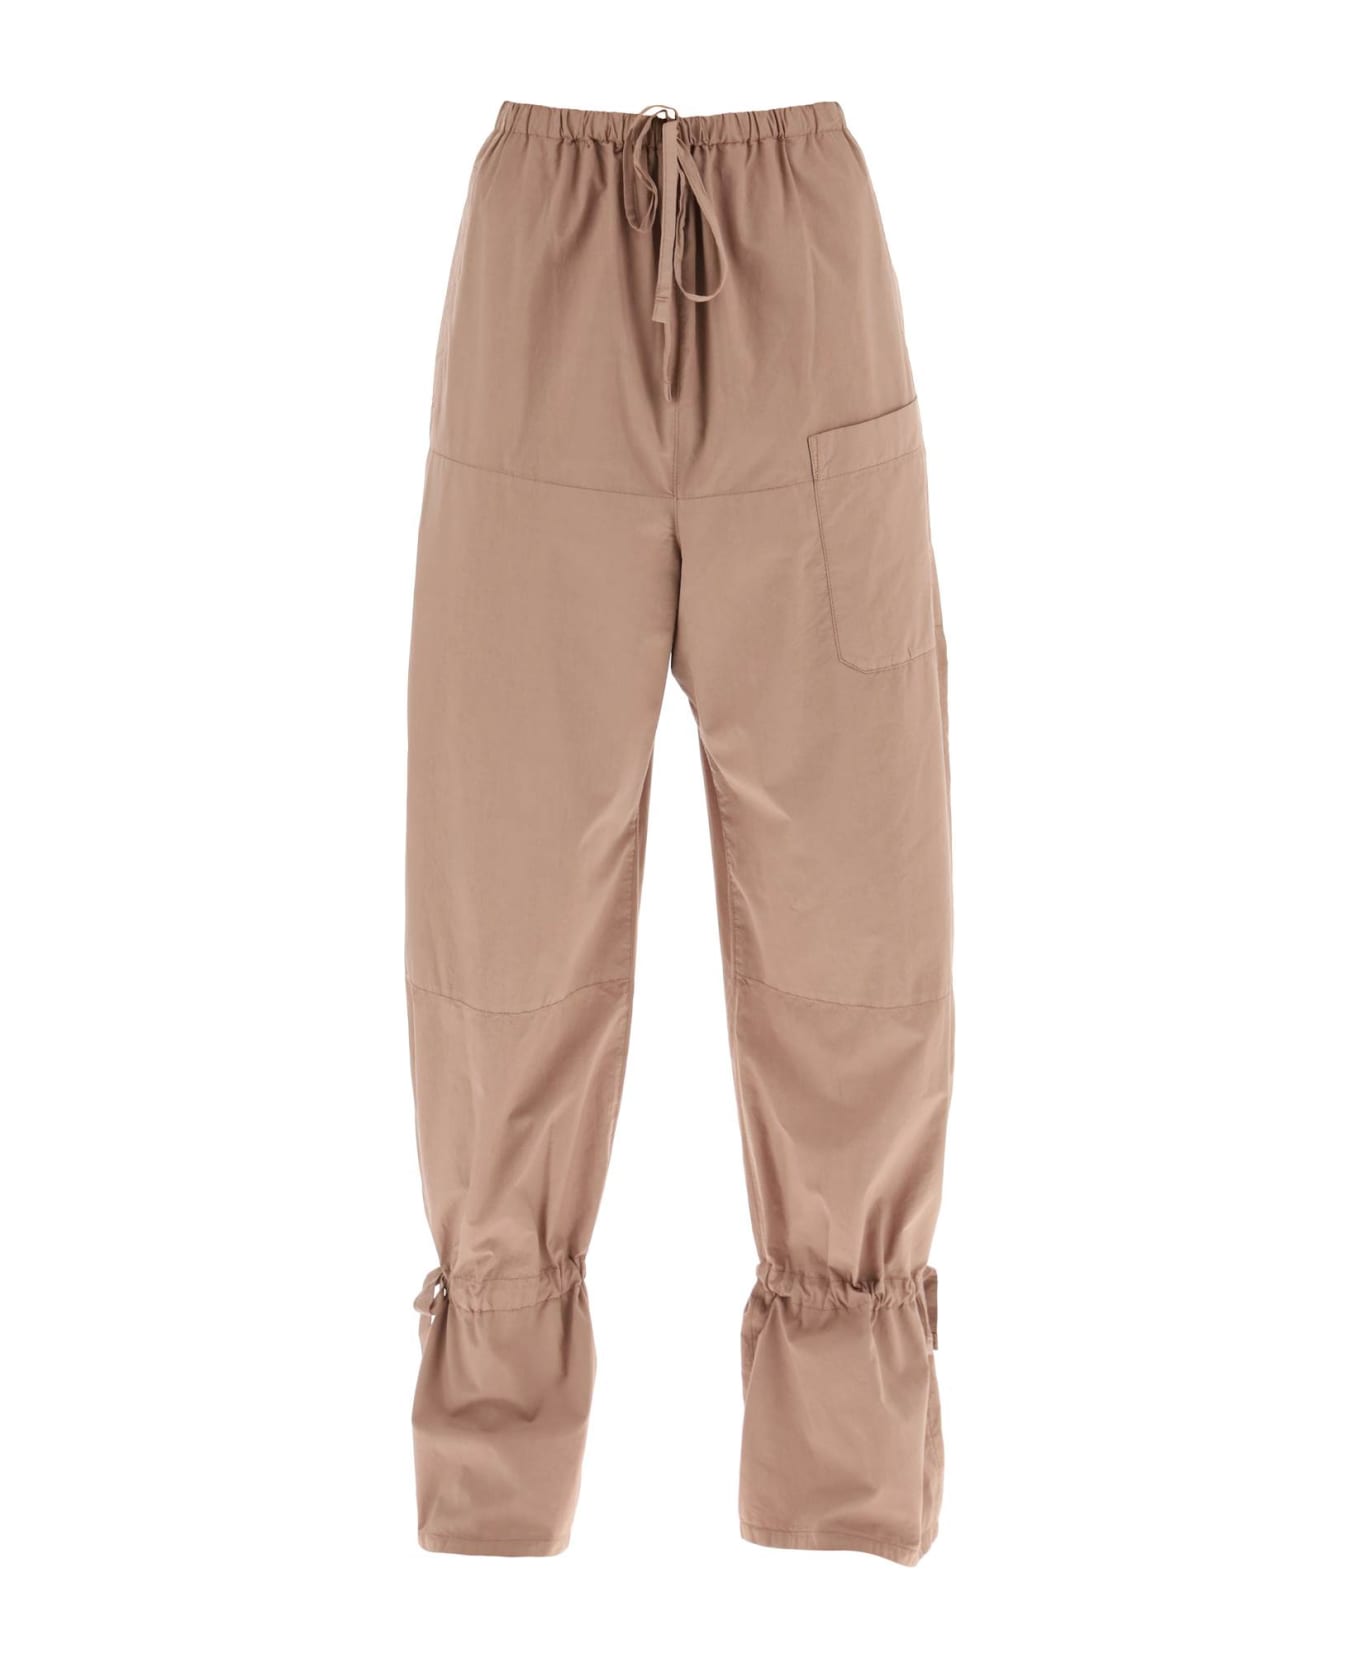 Lemaire 'parachute' Pants - CAPPUCCINO (Brown) ボトムス